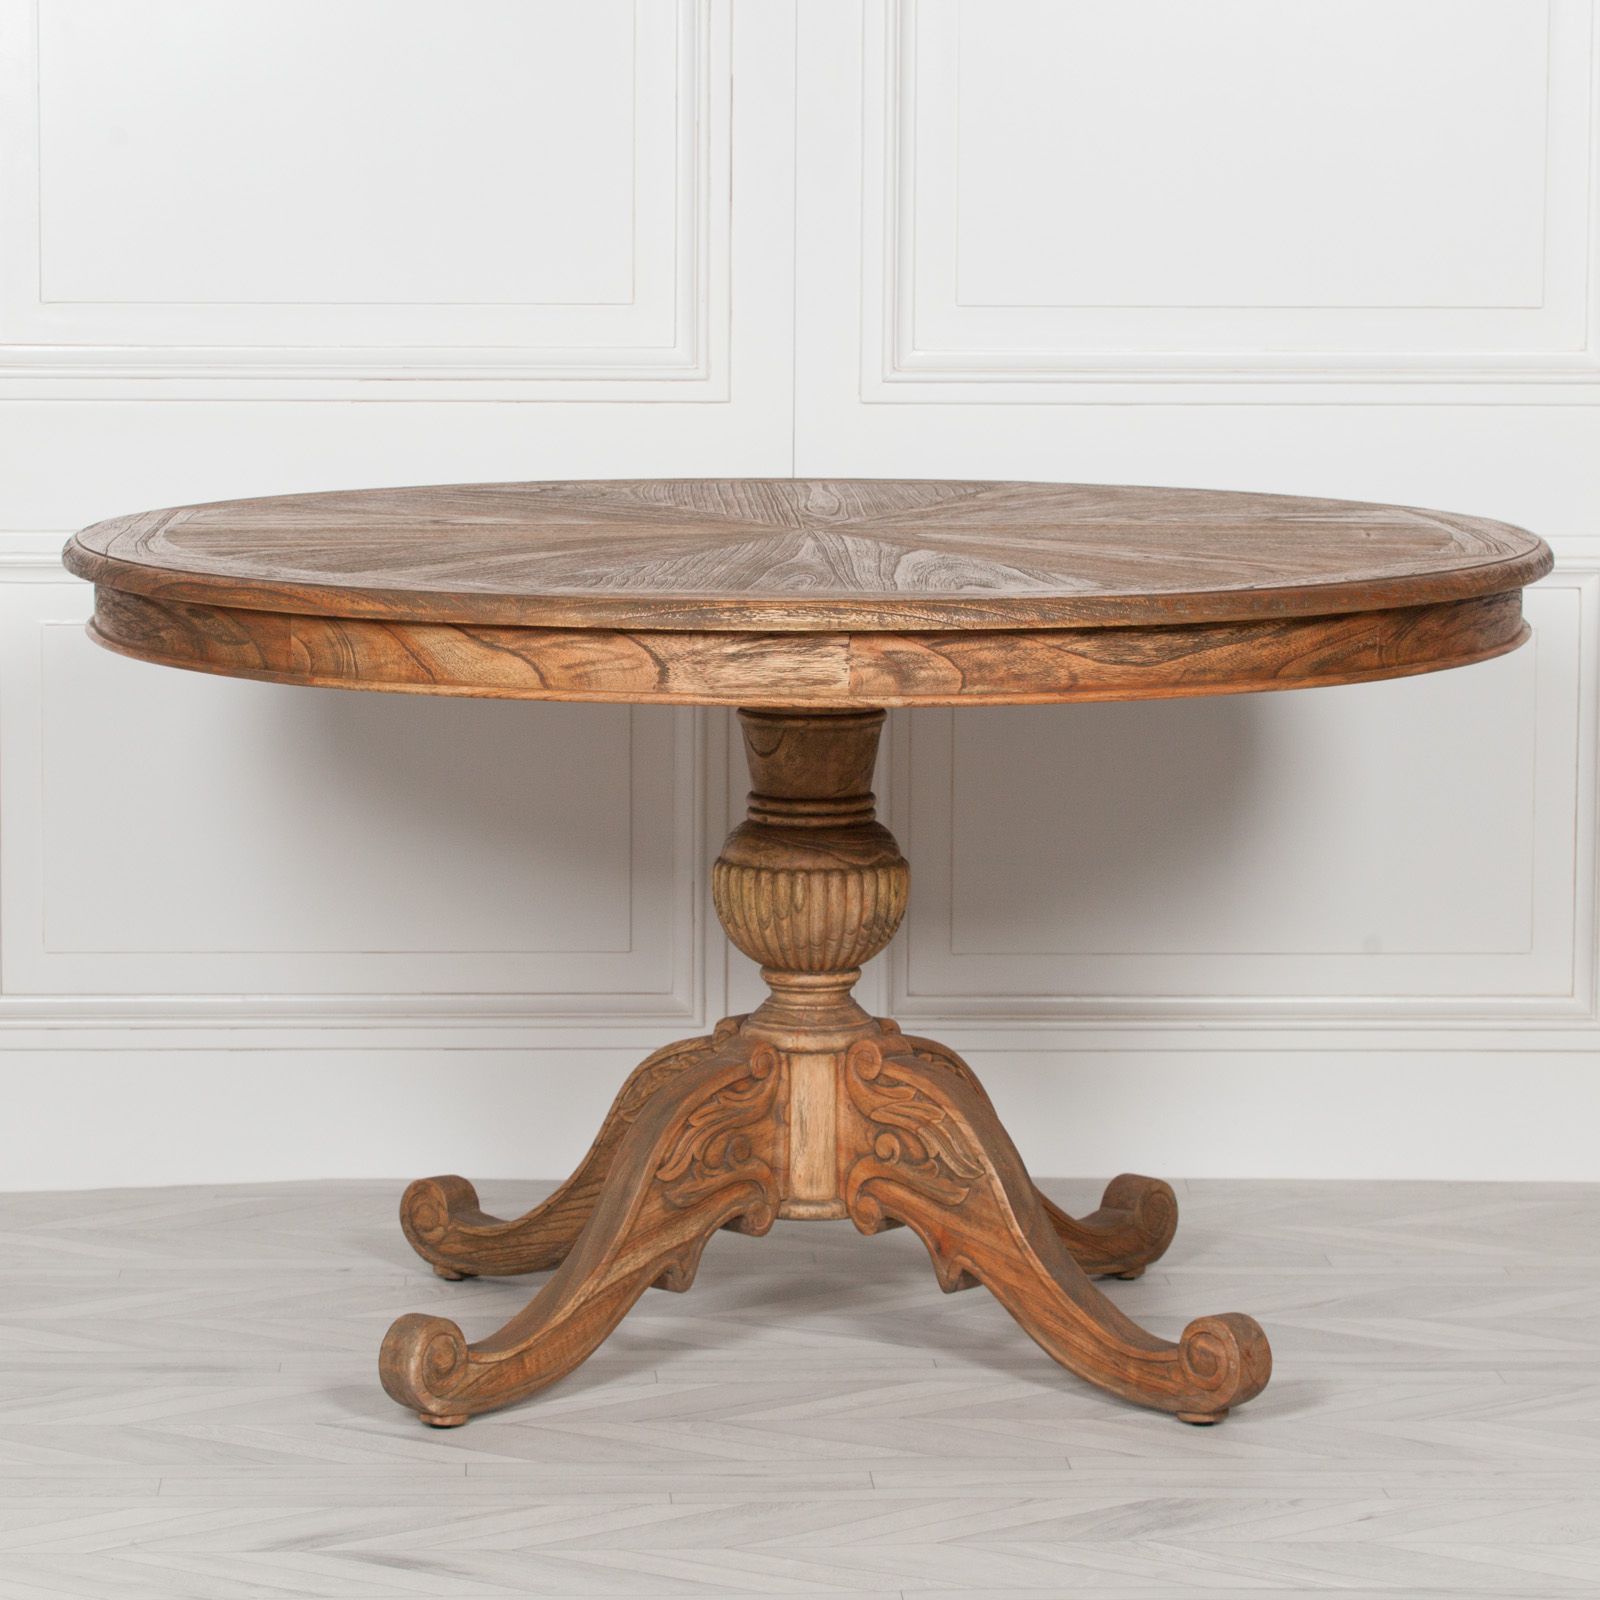 Rustic Honey Dining Tables Inside Most Recently Released Alisanne Rustic Wooden Round Dining Table Furniture – La (View 12 of 15)